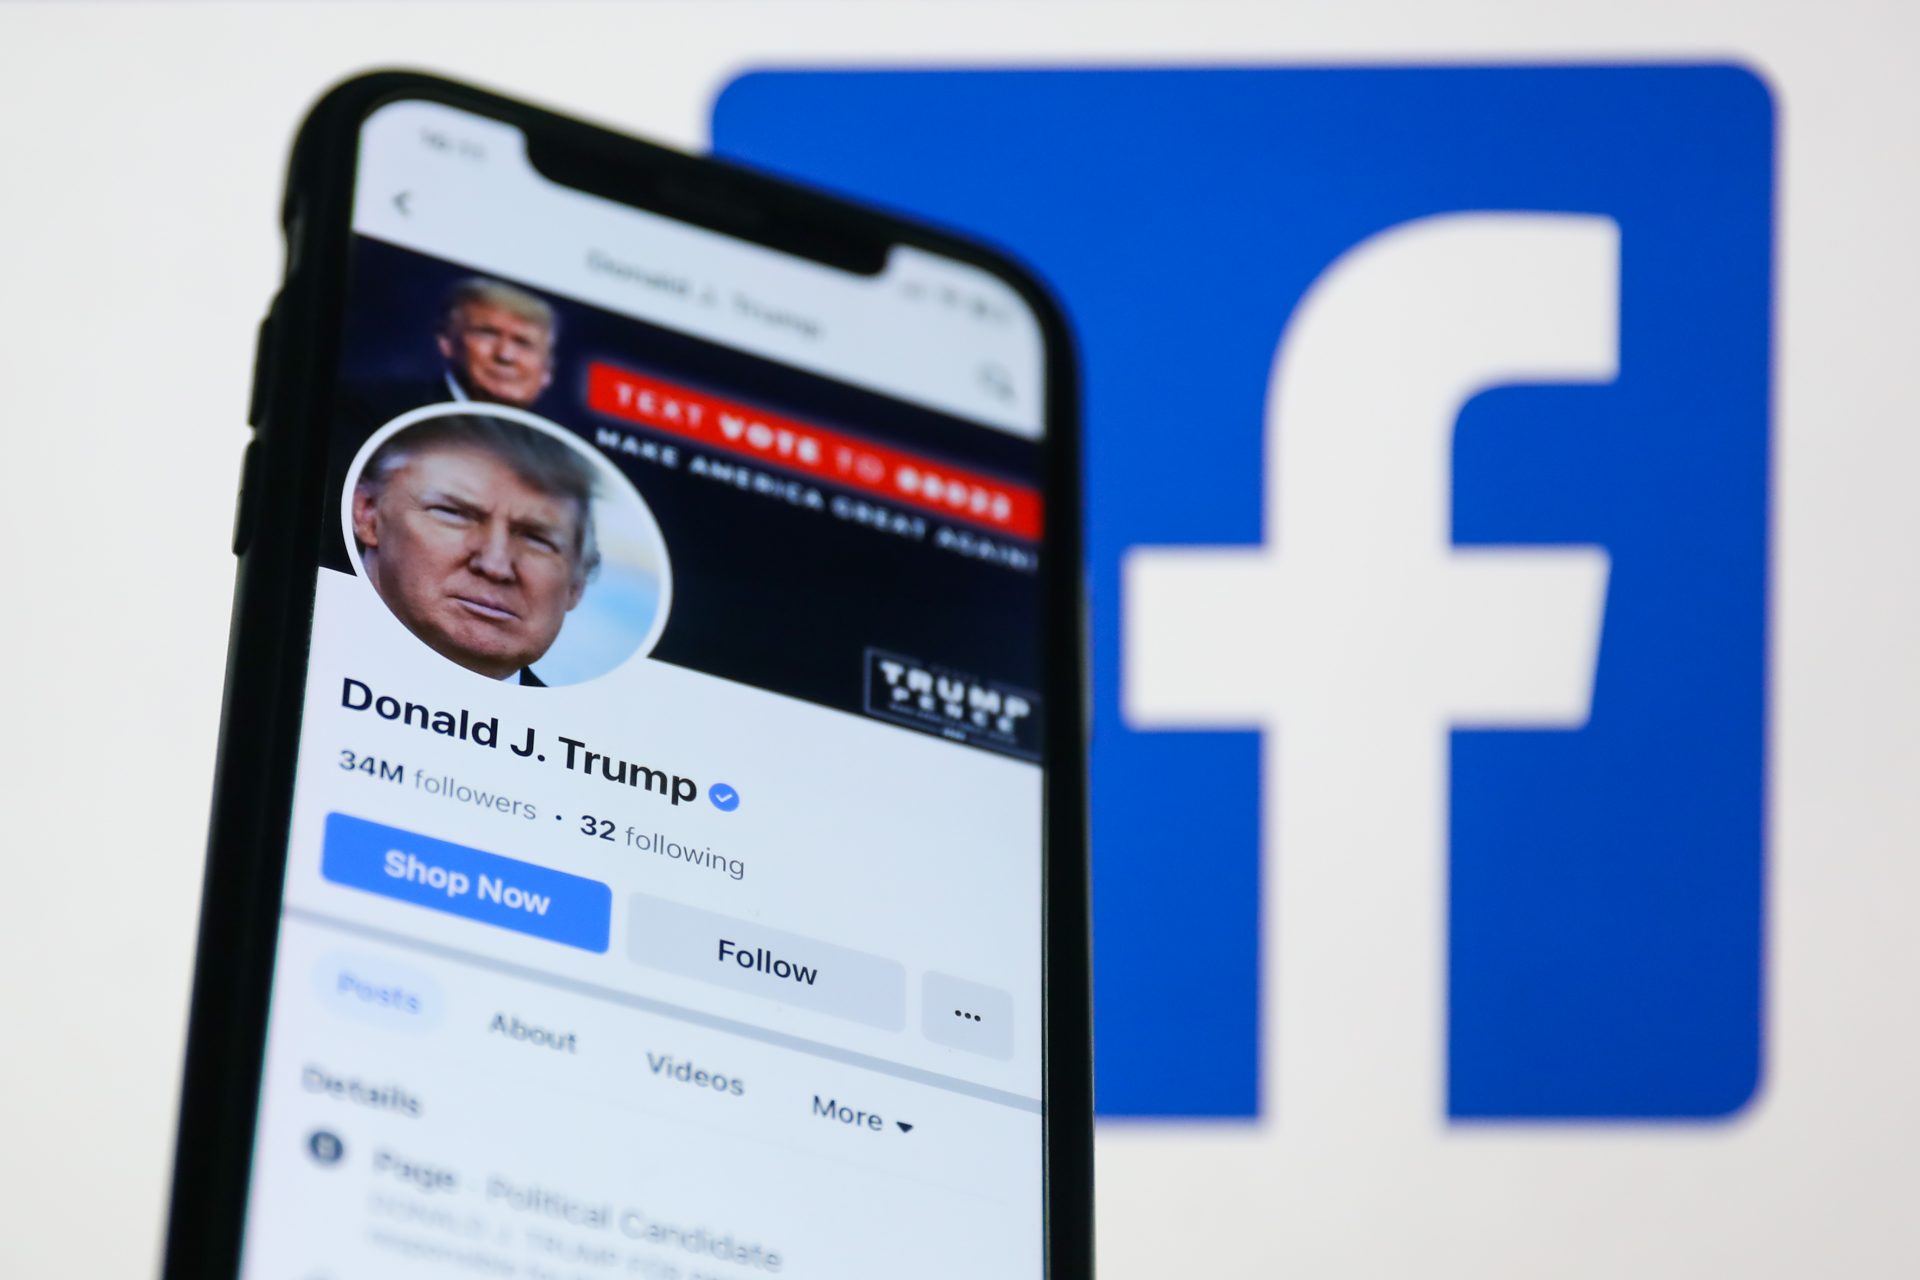 Does social media really affect democracy?